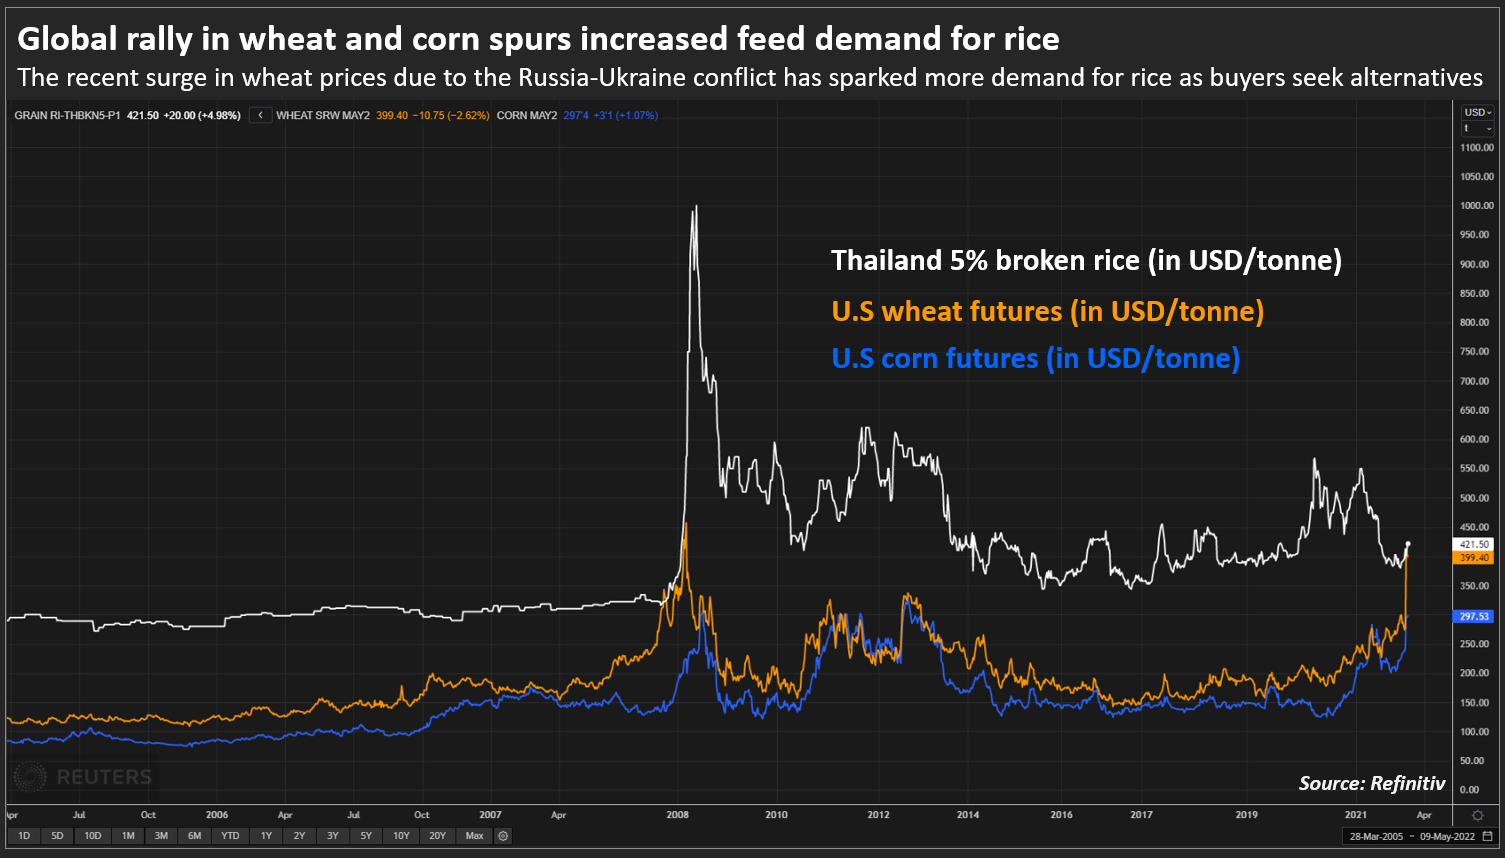 Global rally in wheat and corn spurs increased feed demand for rice